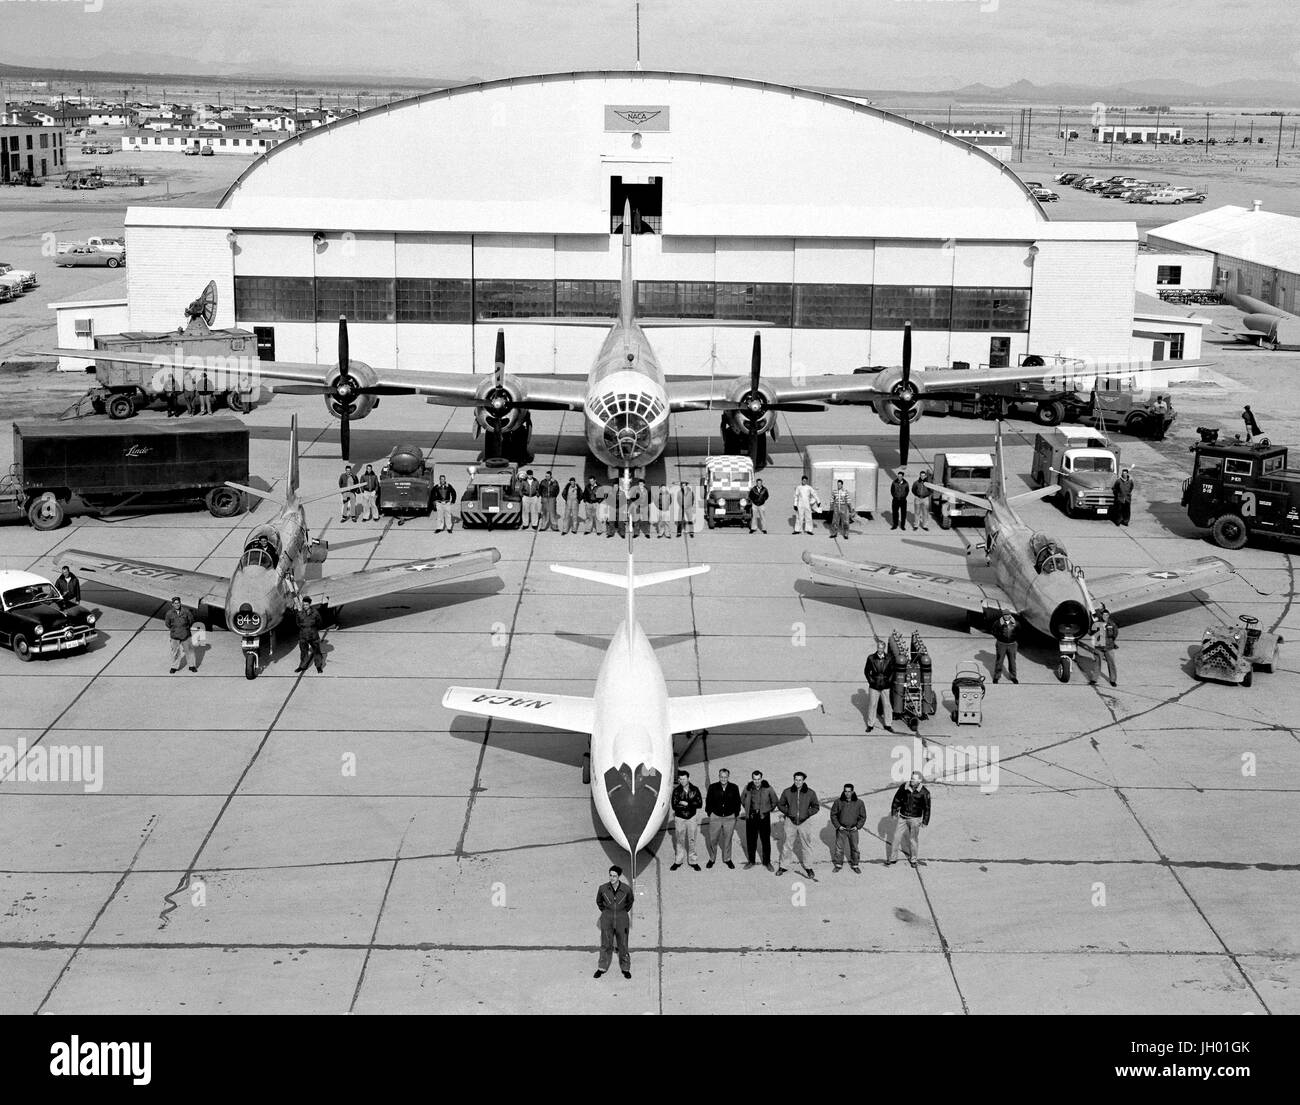 The fleet of NACA test aircraft are assembled in front of the hangar at the High Speed Flight Station, (later renamed the Dryden Flight Research Center) in Edwards, California. The white aircraft in the foreground is a Douglas Aircraft D-558-2 Skyrocket. To its left and right are North American F-86 Sabre chase aircraft. Directly behind the D-558-2 is the P2B-1 Superfortress, (the Navy version of the Air Force B-29). Also known as the 'mothership,' the P2B-1 carried aloft the D-558-2 Skyrocket under its fuselage. Once reaching altitude, the D-558-2 was released from the 'mothership' . Stock Photo